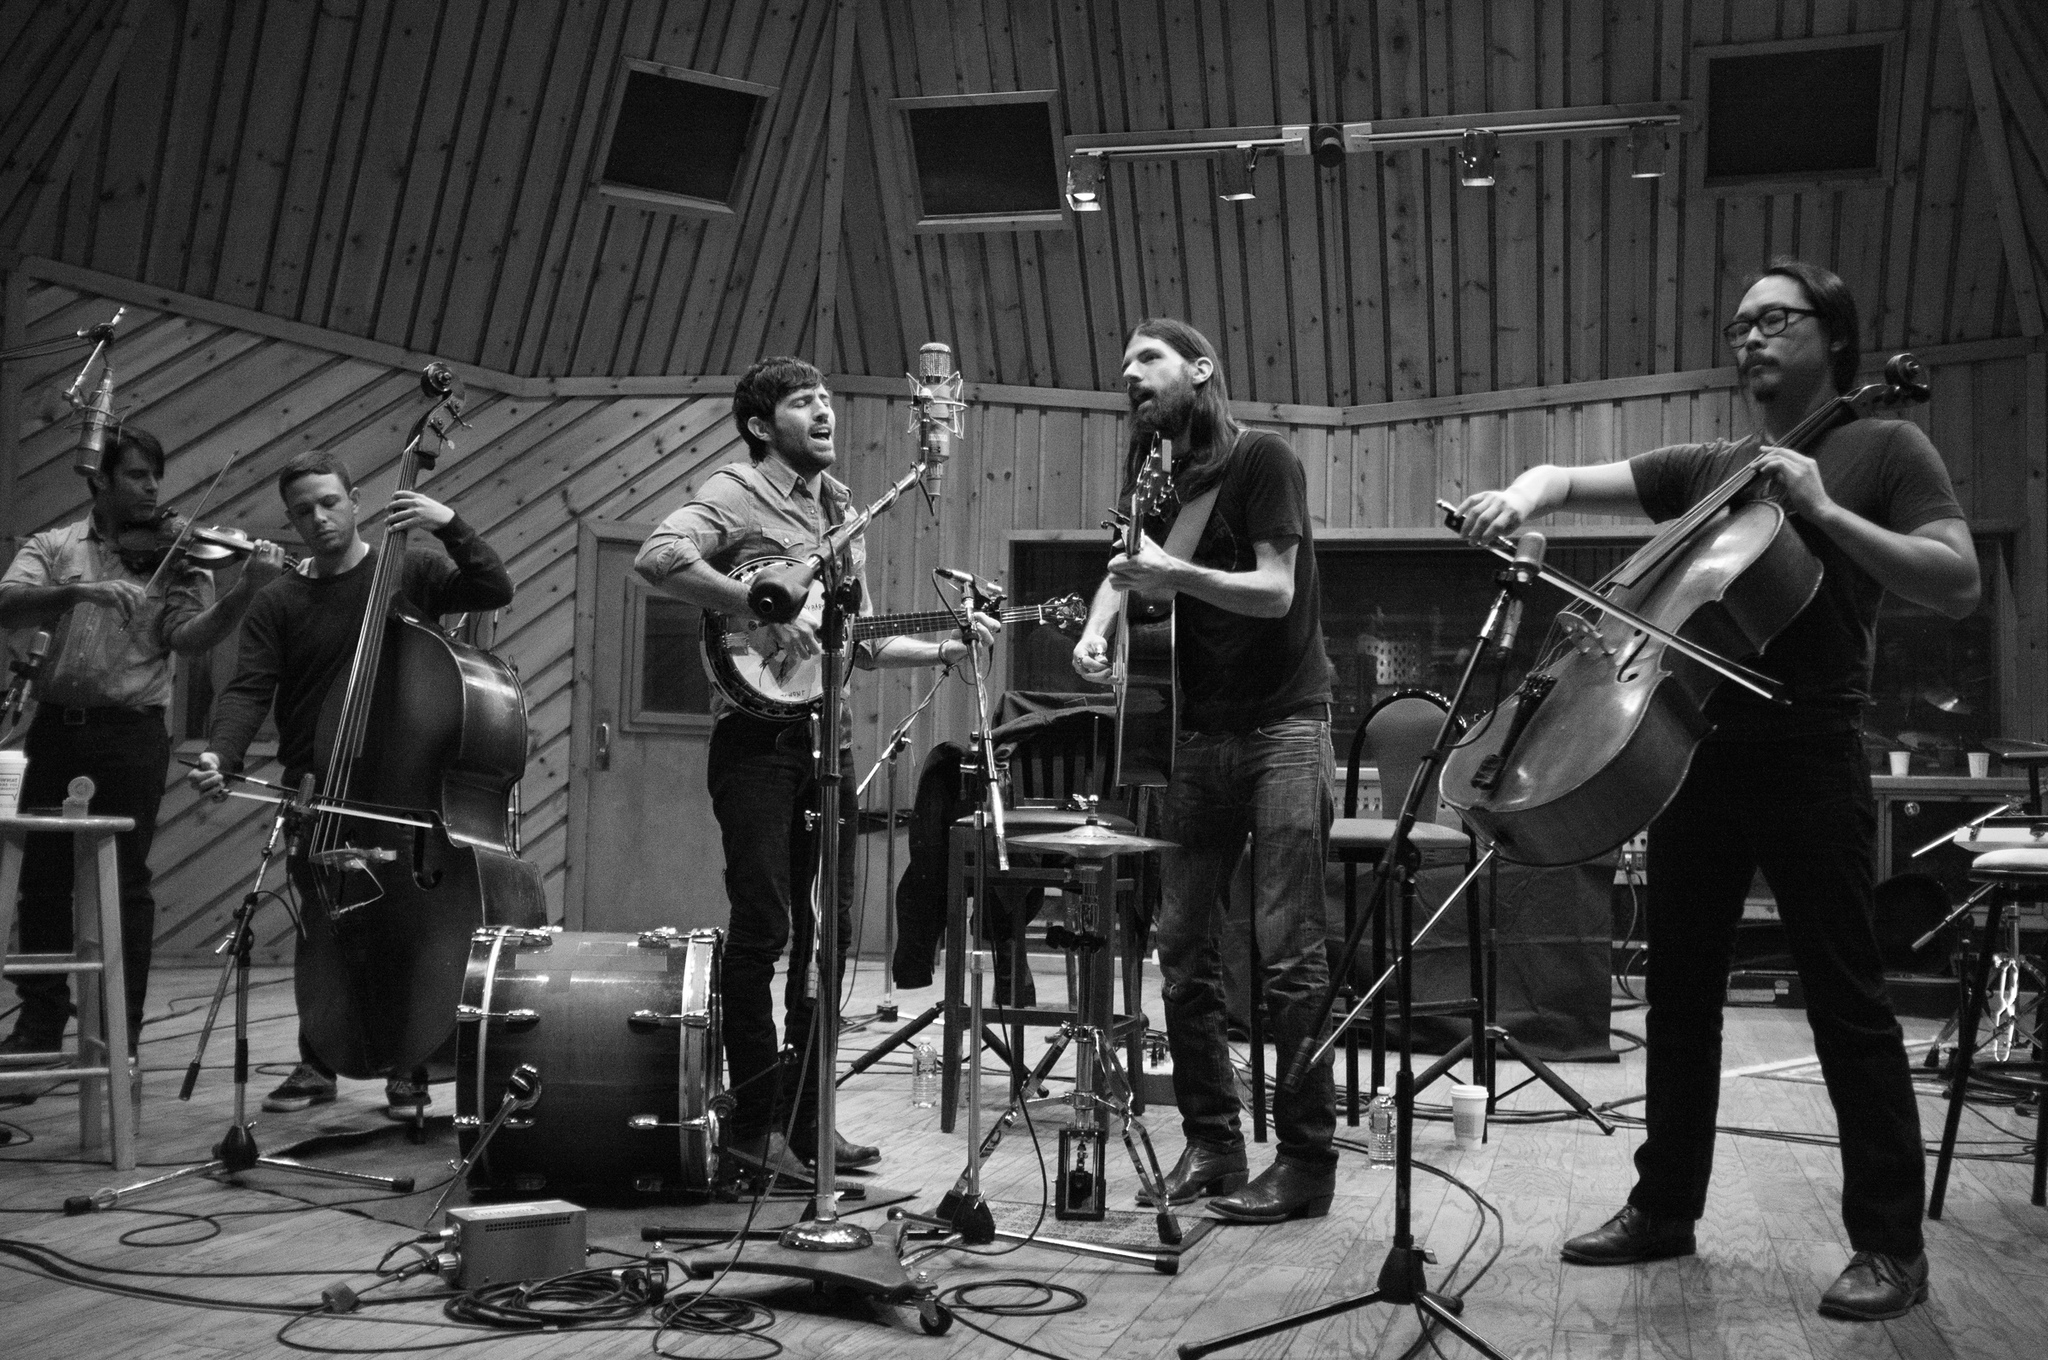 Still of The Music, Mike Marsh, The Avett Brothers, Joe Kwon, Scott Avett, Seth Avett and Bob Crawford in Another Day, Another Time: Celebrating the Music of Inside Llewyn Davis (2013)